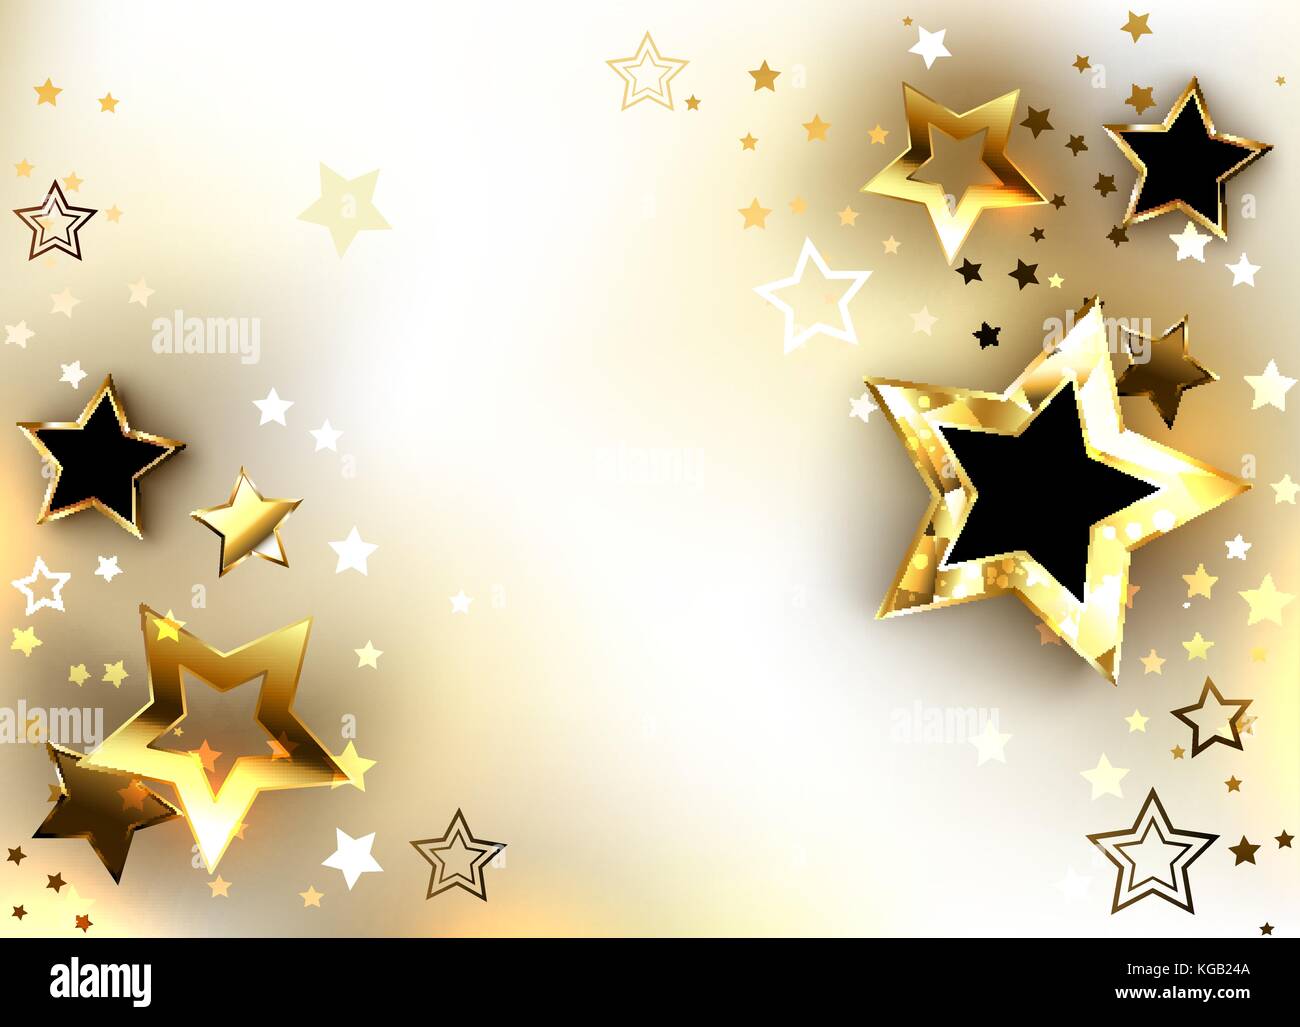 Light background with golden sparkling stars. Design with gold stars. Stock Vector